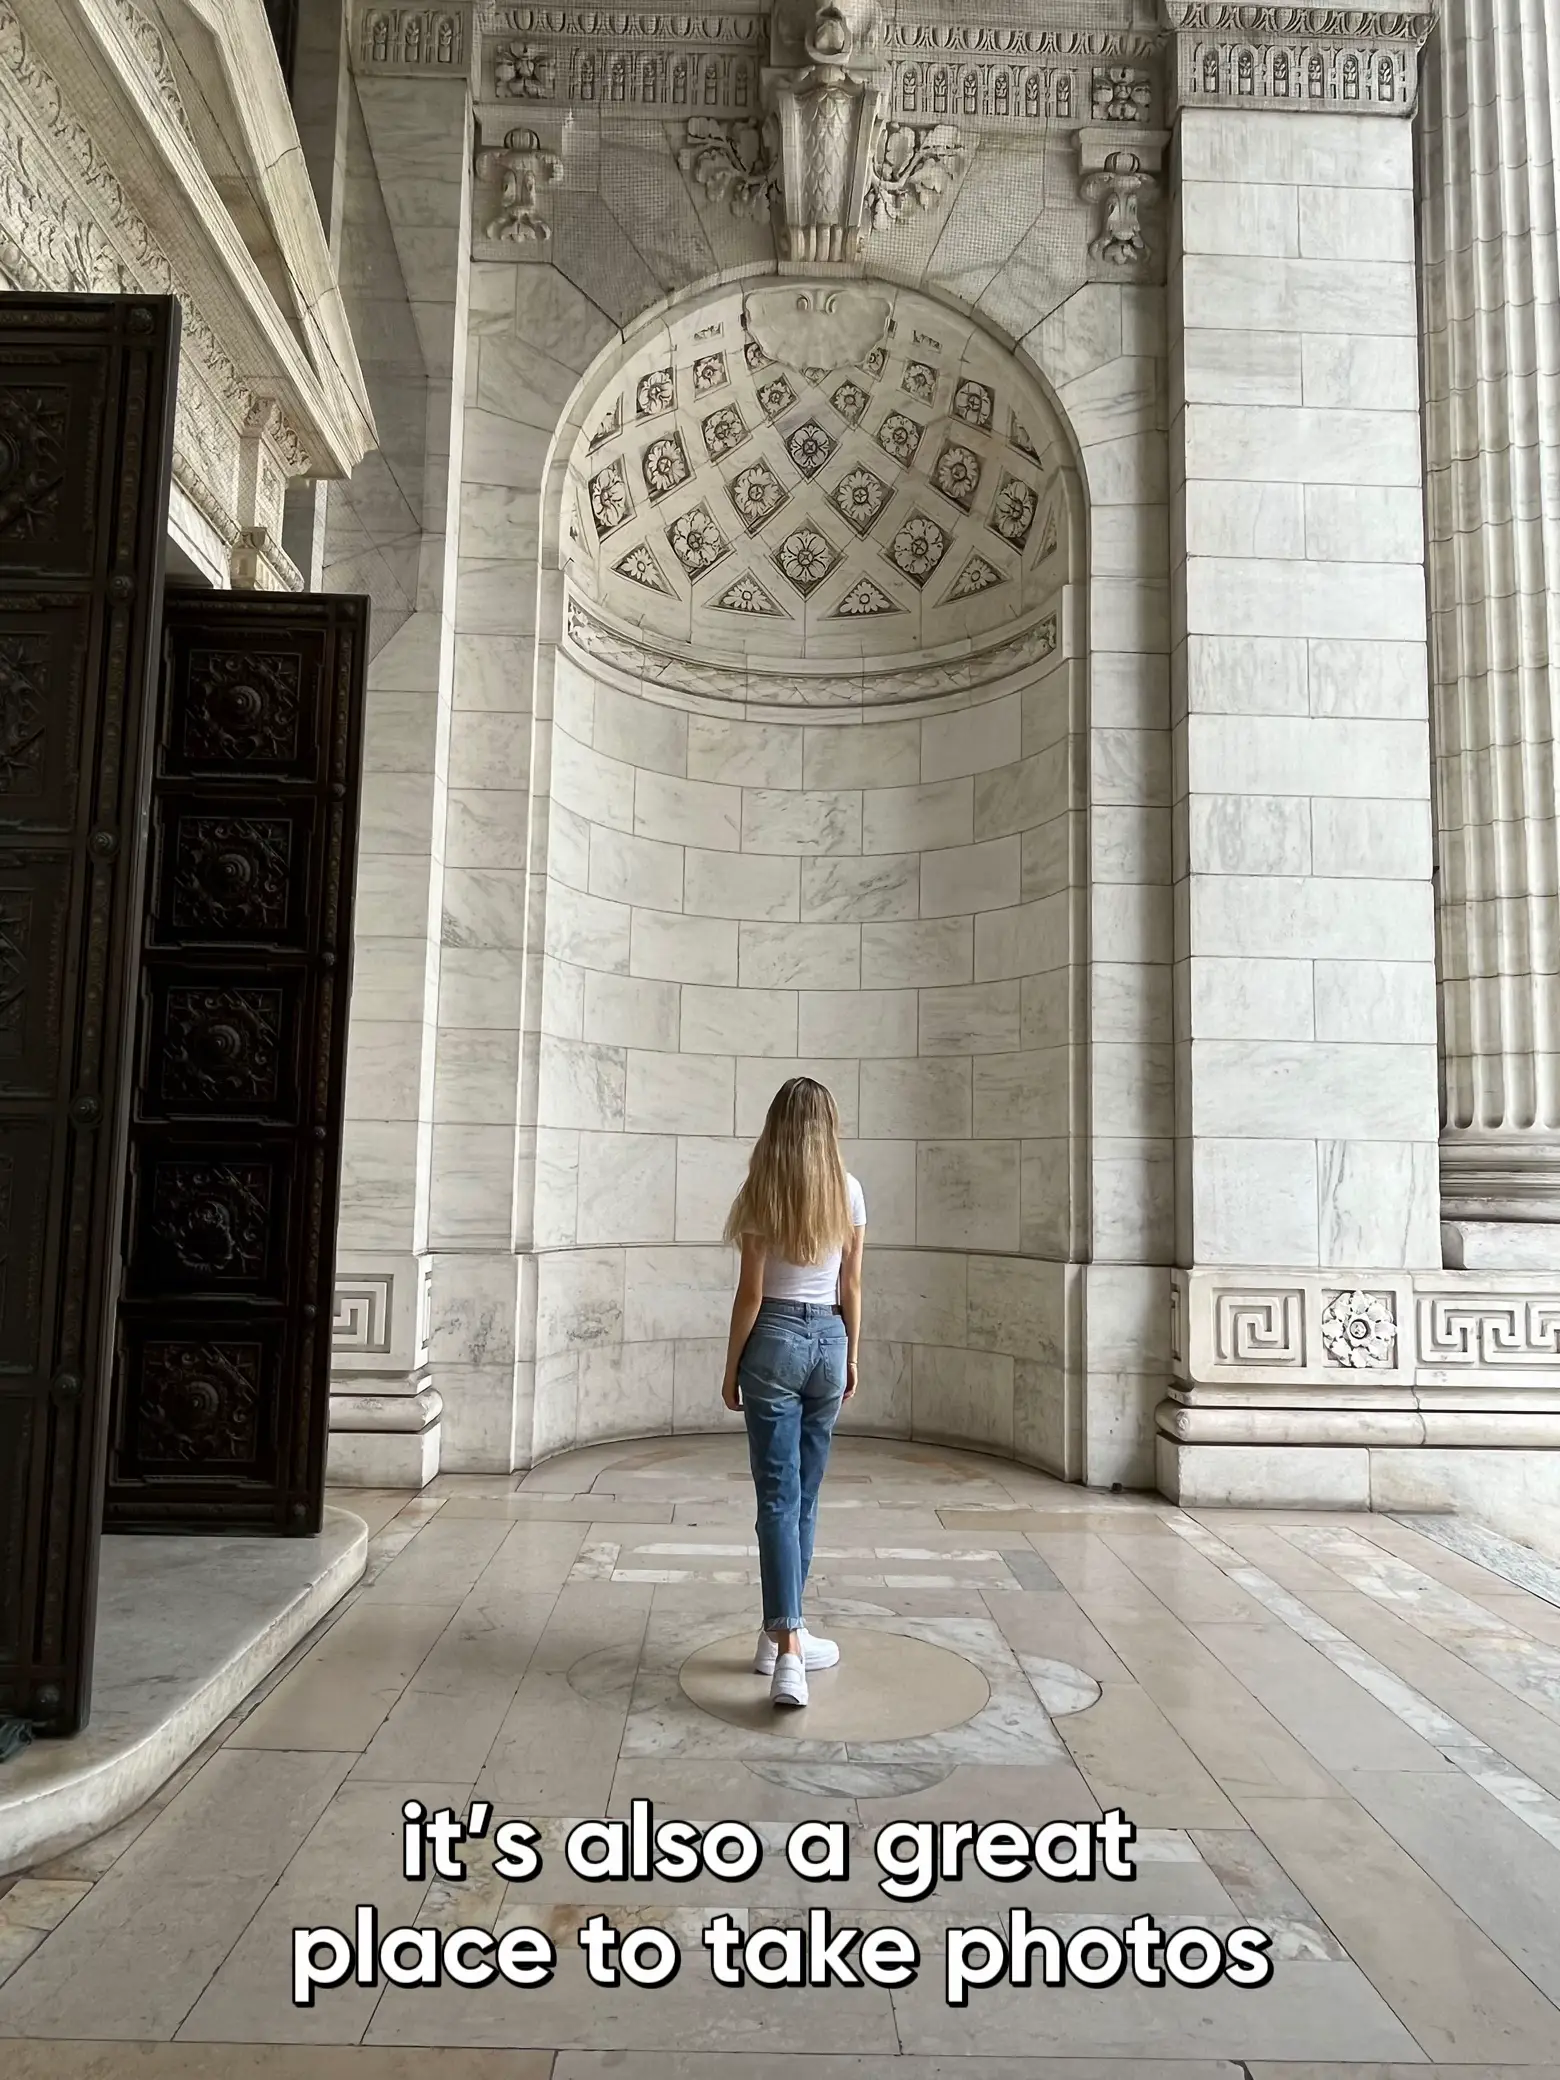  A woman is walking in front of a building with a archway. The building has a large window and a pillar. The woman is wearing a white shirt and jeans. The building is described as